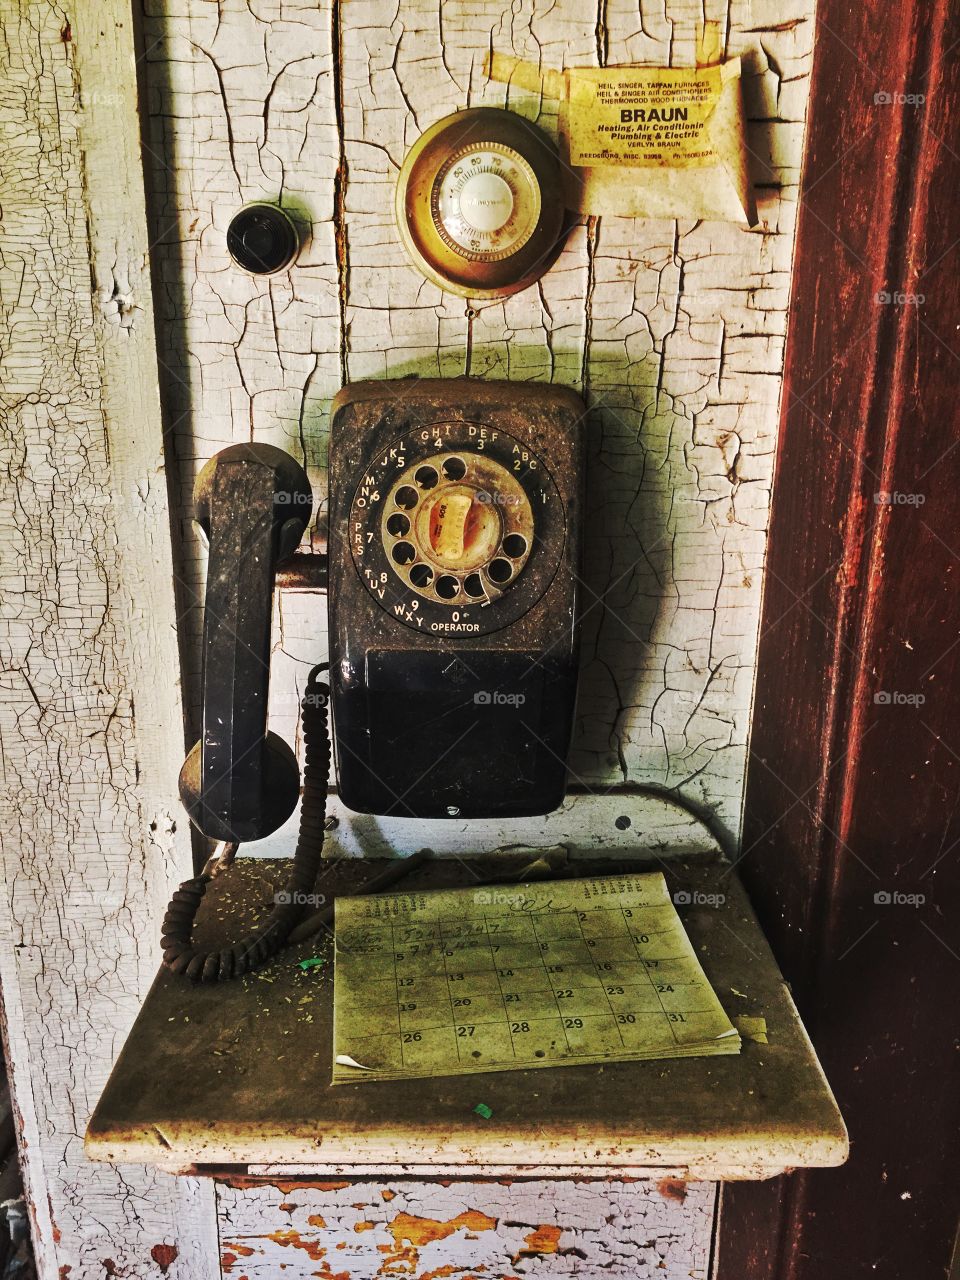 1978 calling. A phone untouched since 1978